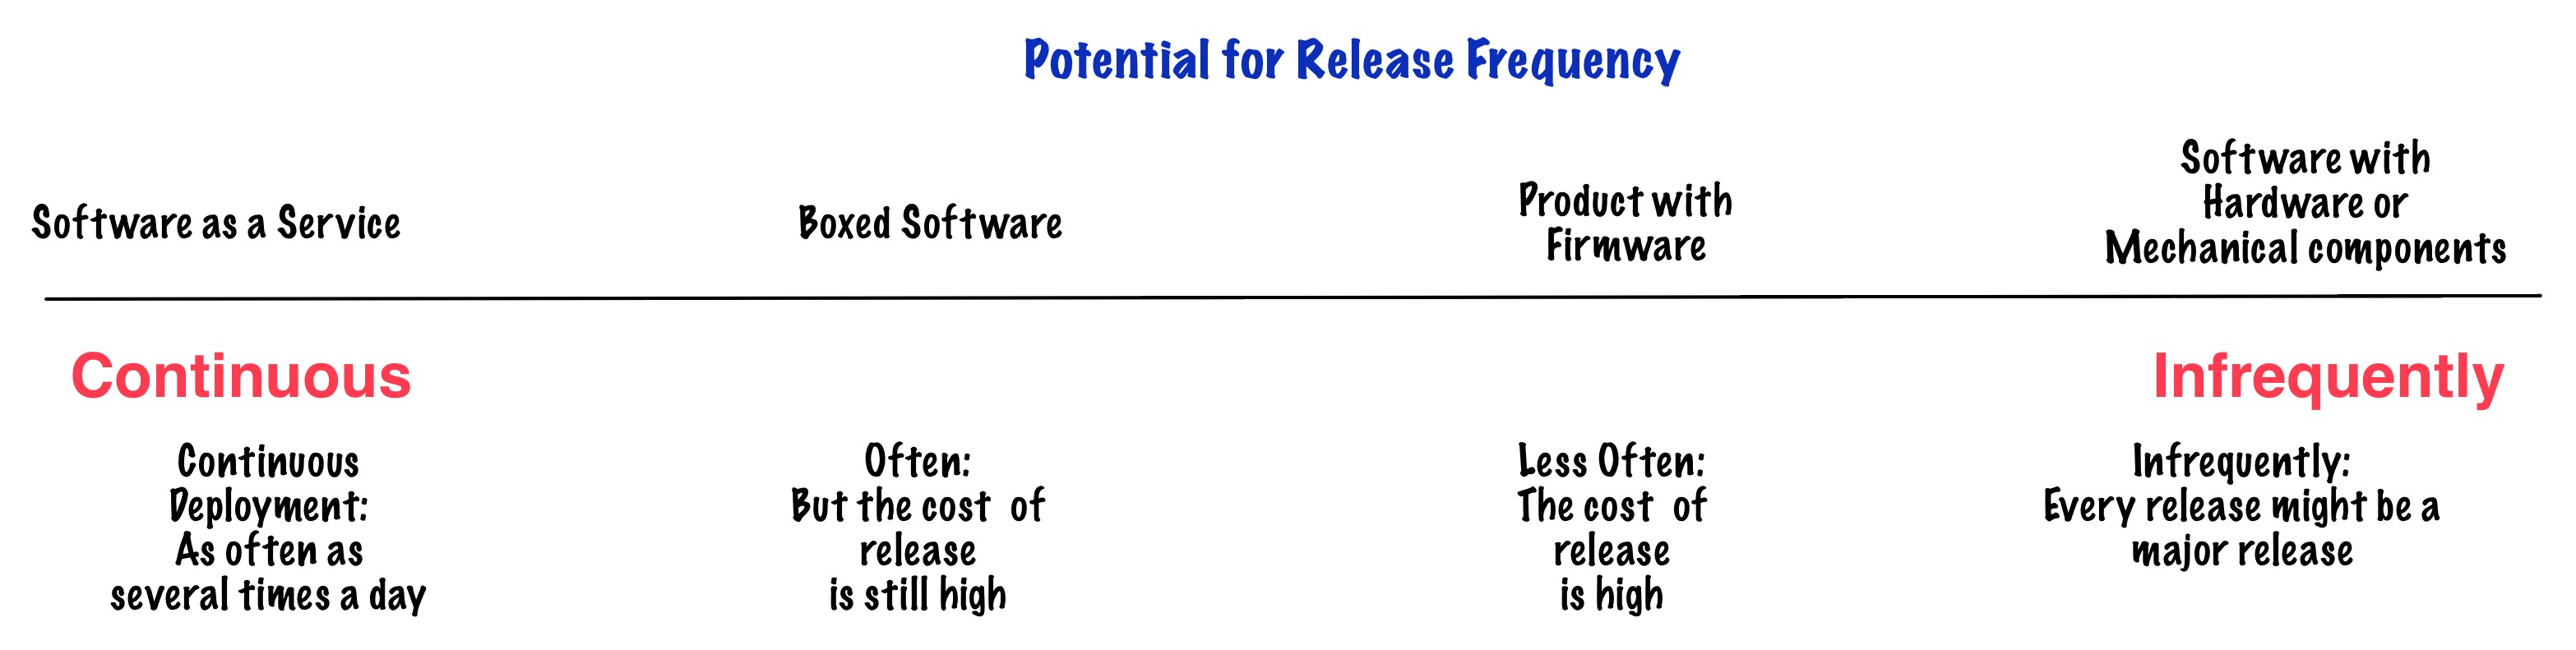 Potential for Release Frequency